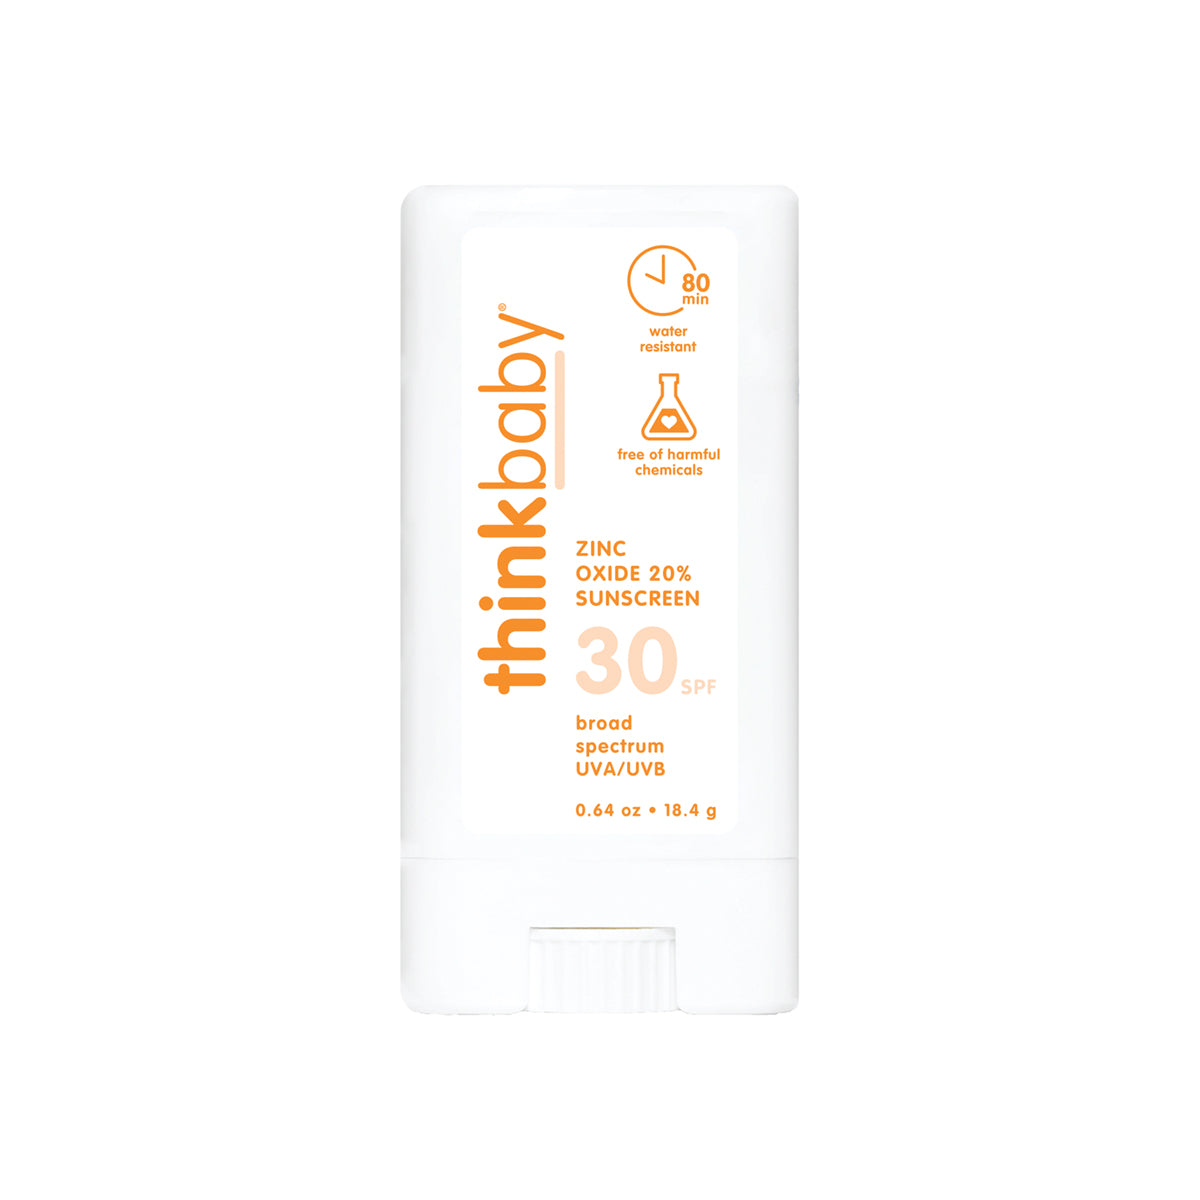 Thinkbaby sunscreen stick with SPF 30, highlighting zinc oxide content and water resistance up to 80 minutes, free of harmful chemicals.